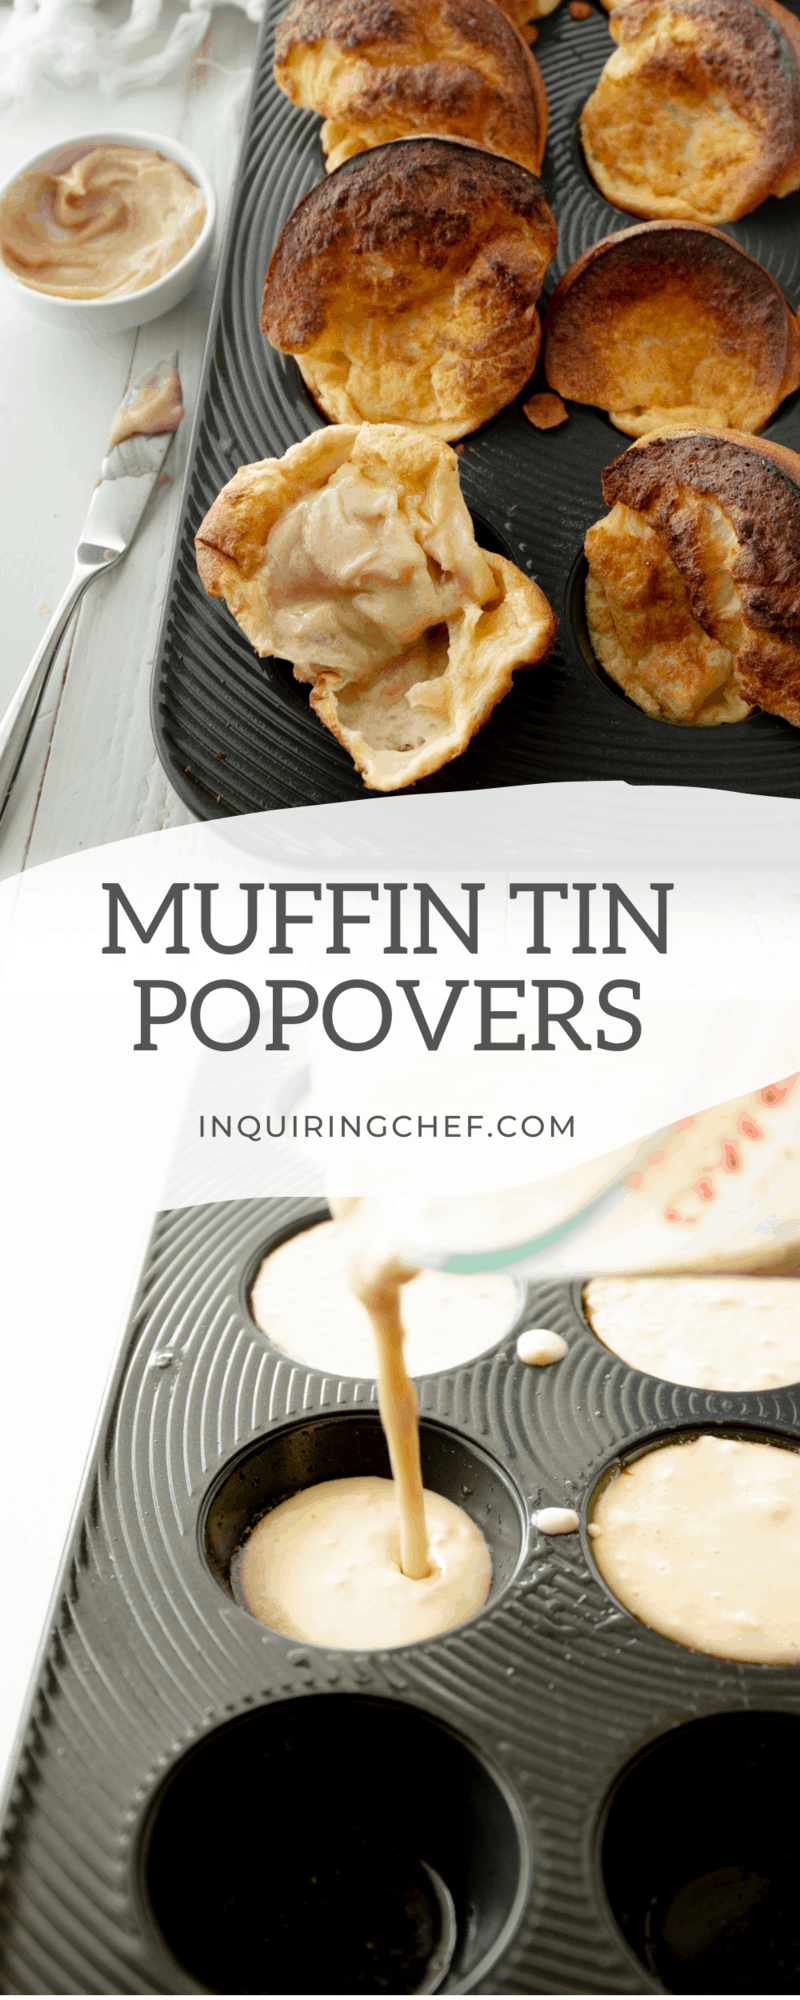 muffin tin popovers